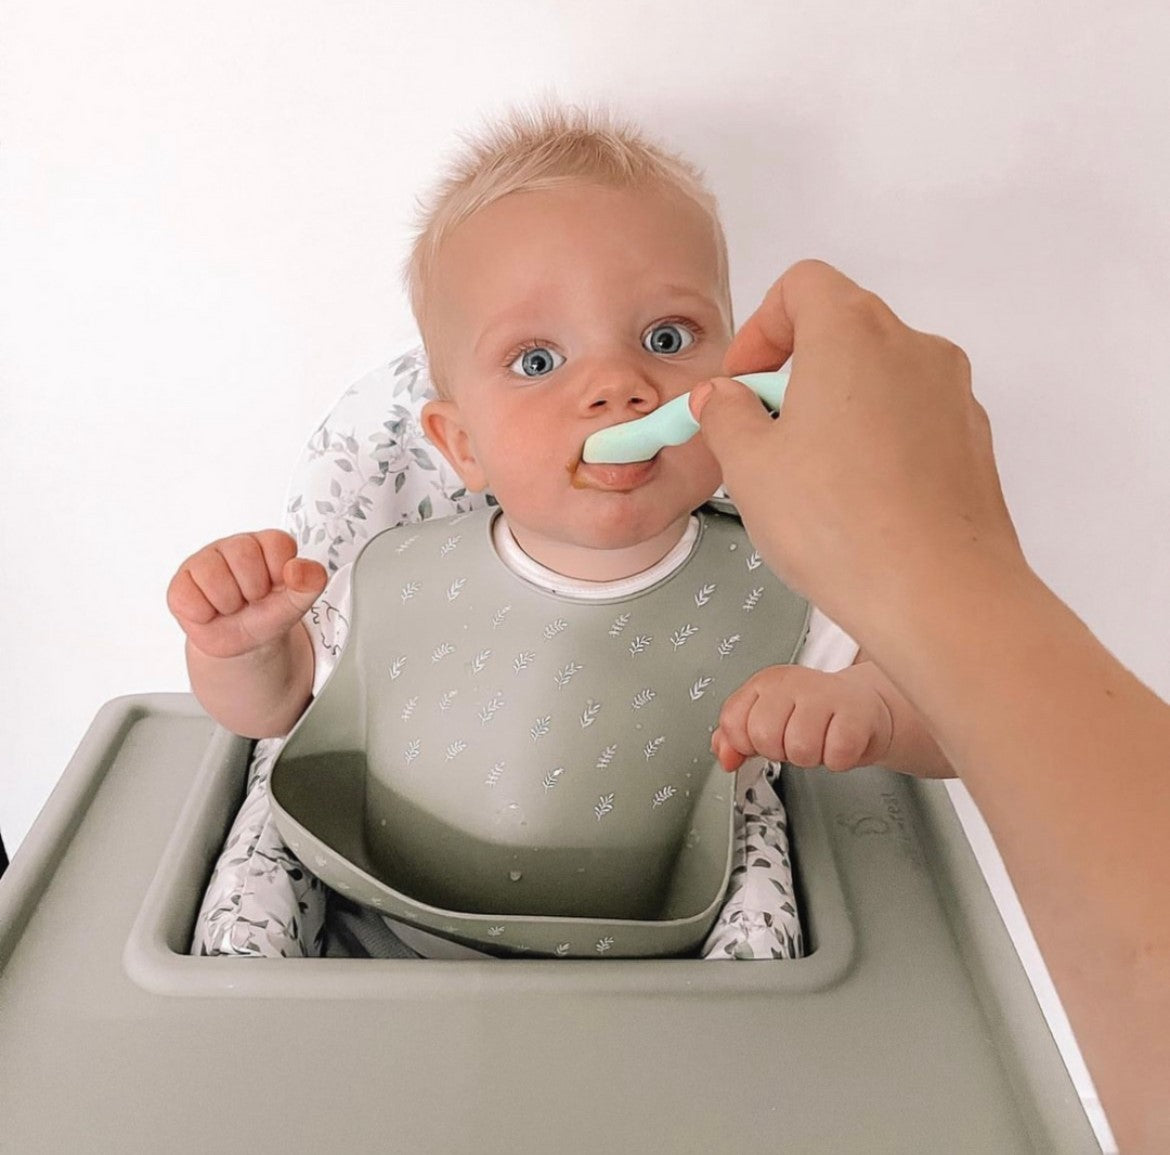 Silicone Bib with Spoon - Olive